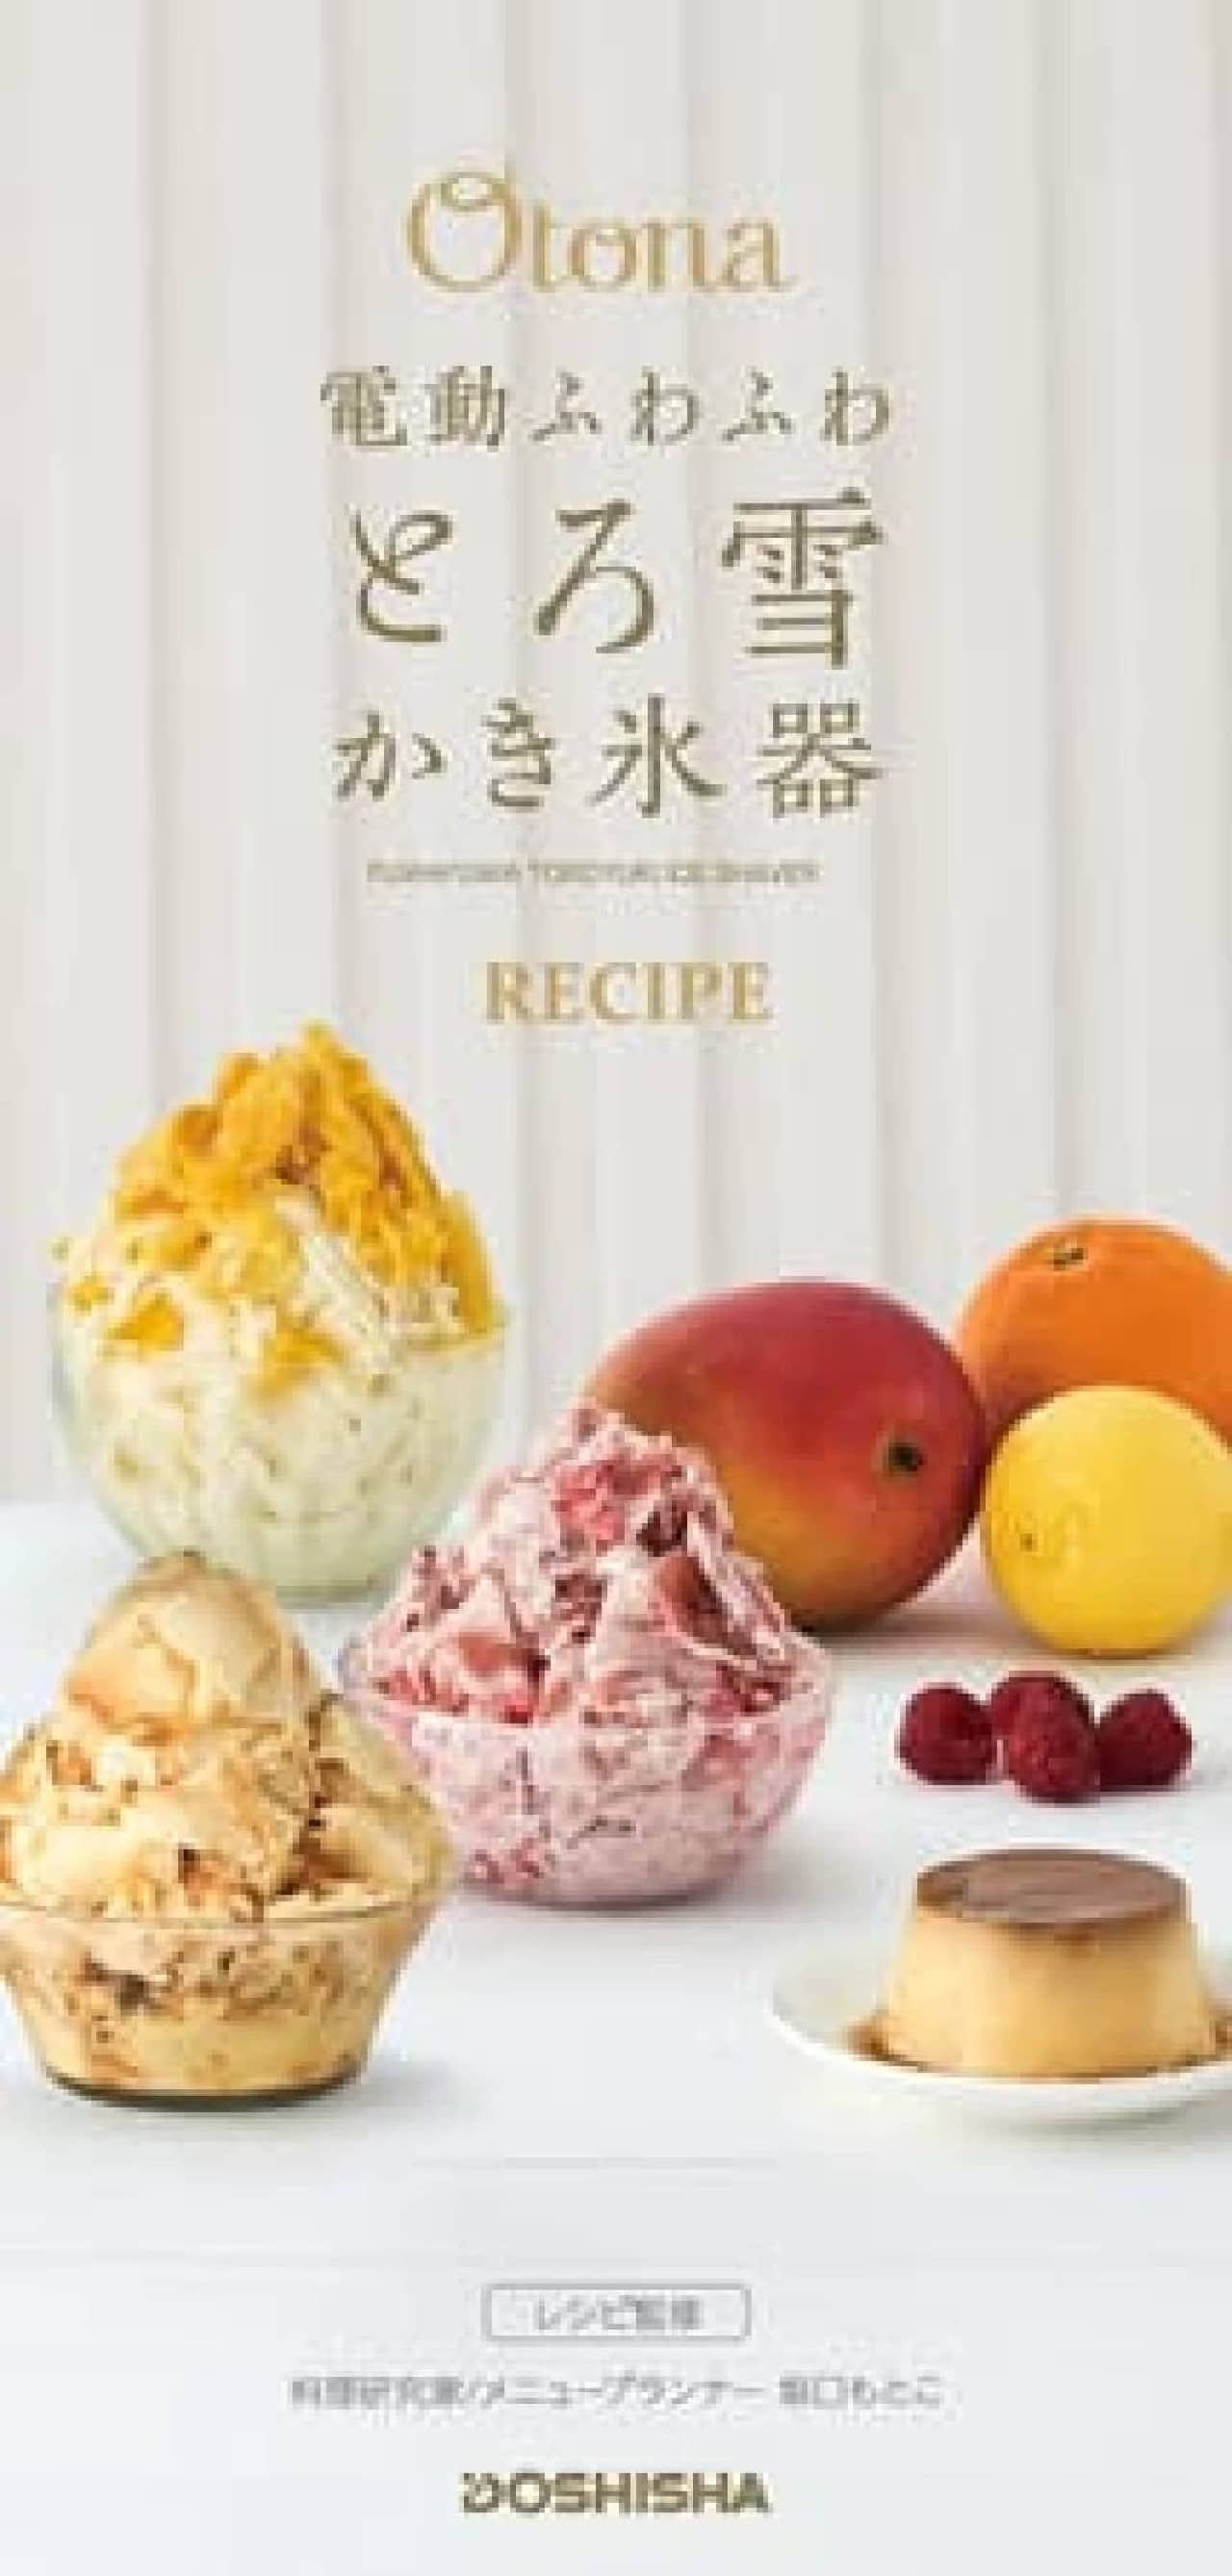 Renewal release of "Electric Fluffy Melting Snow Shaved Ice Machine" -- for making Taiwanese-style shaved ice and sweet shaved ice! Improved operability and enhanced recipes